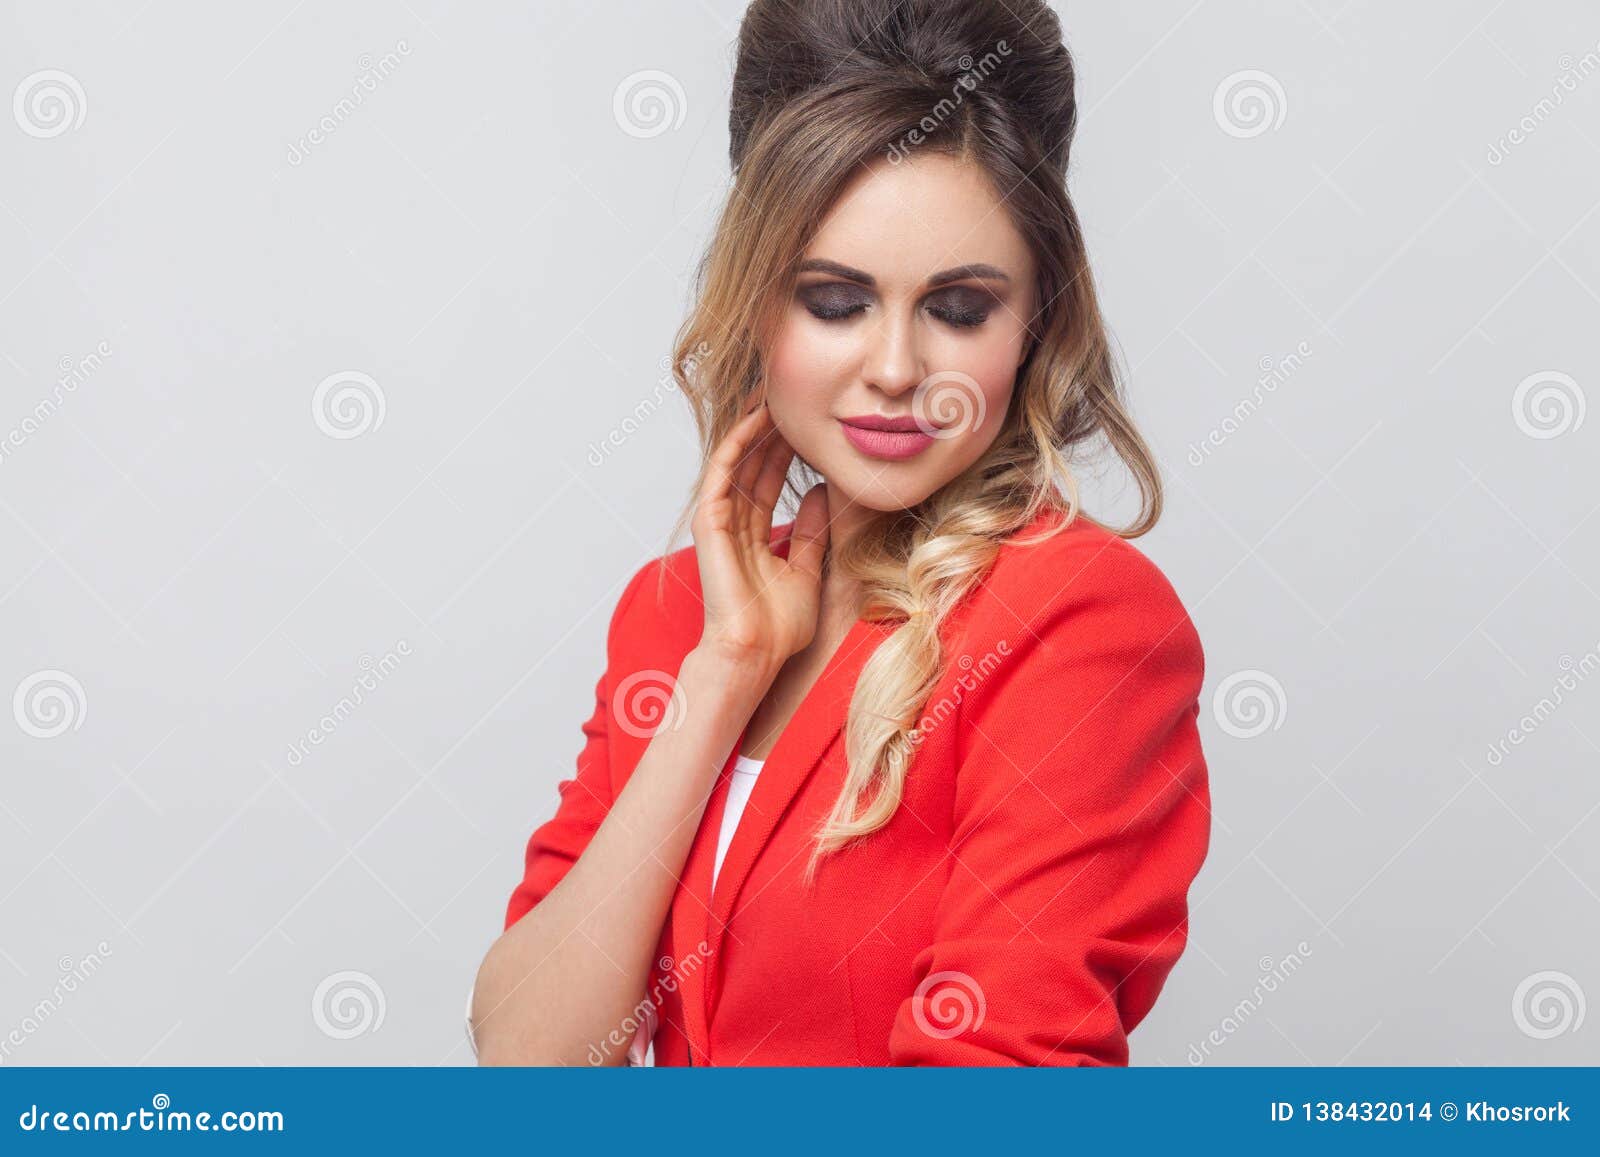 Portrait of Beautiful Business Lady with Hairstyle and Makeup in Red Fancy  Blazer Standing and Touching Her Face and Smiling with Stock Photo - Image  of clean, hairstyle: 138432014